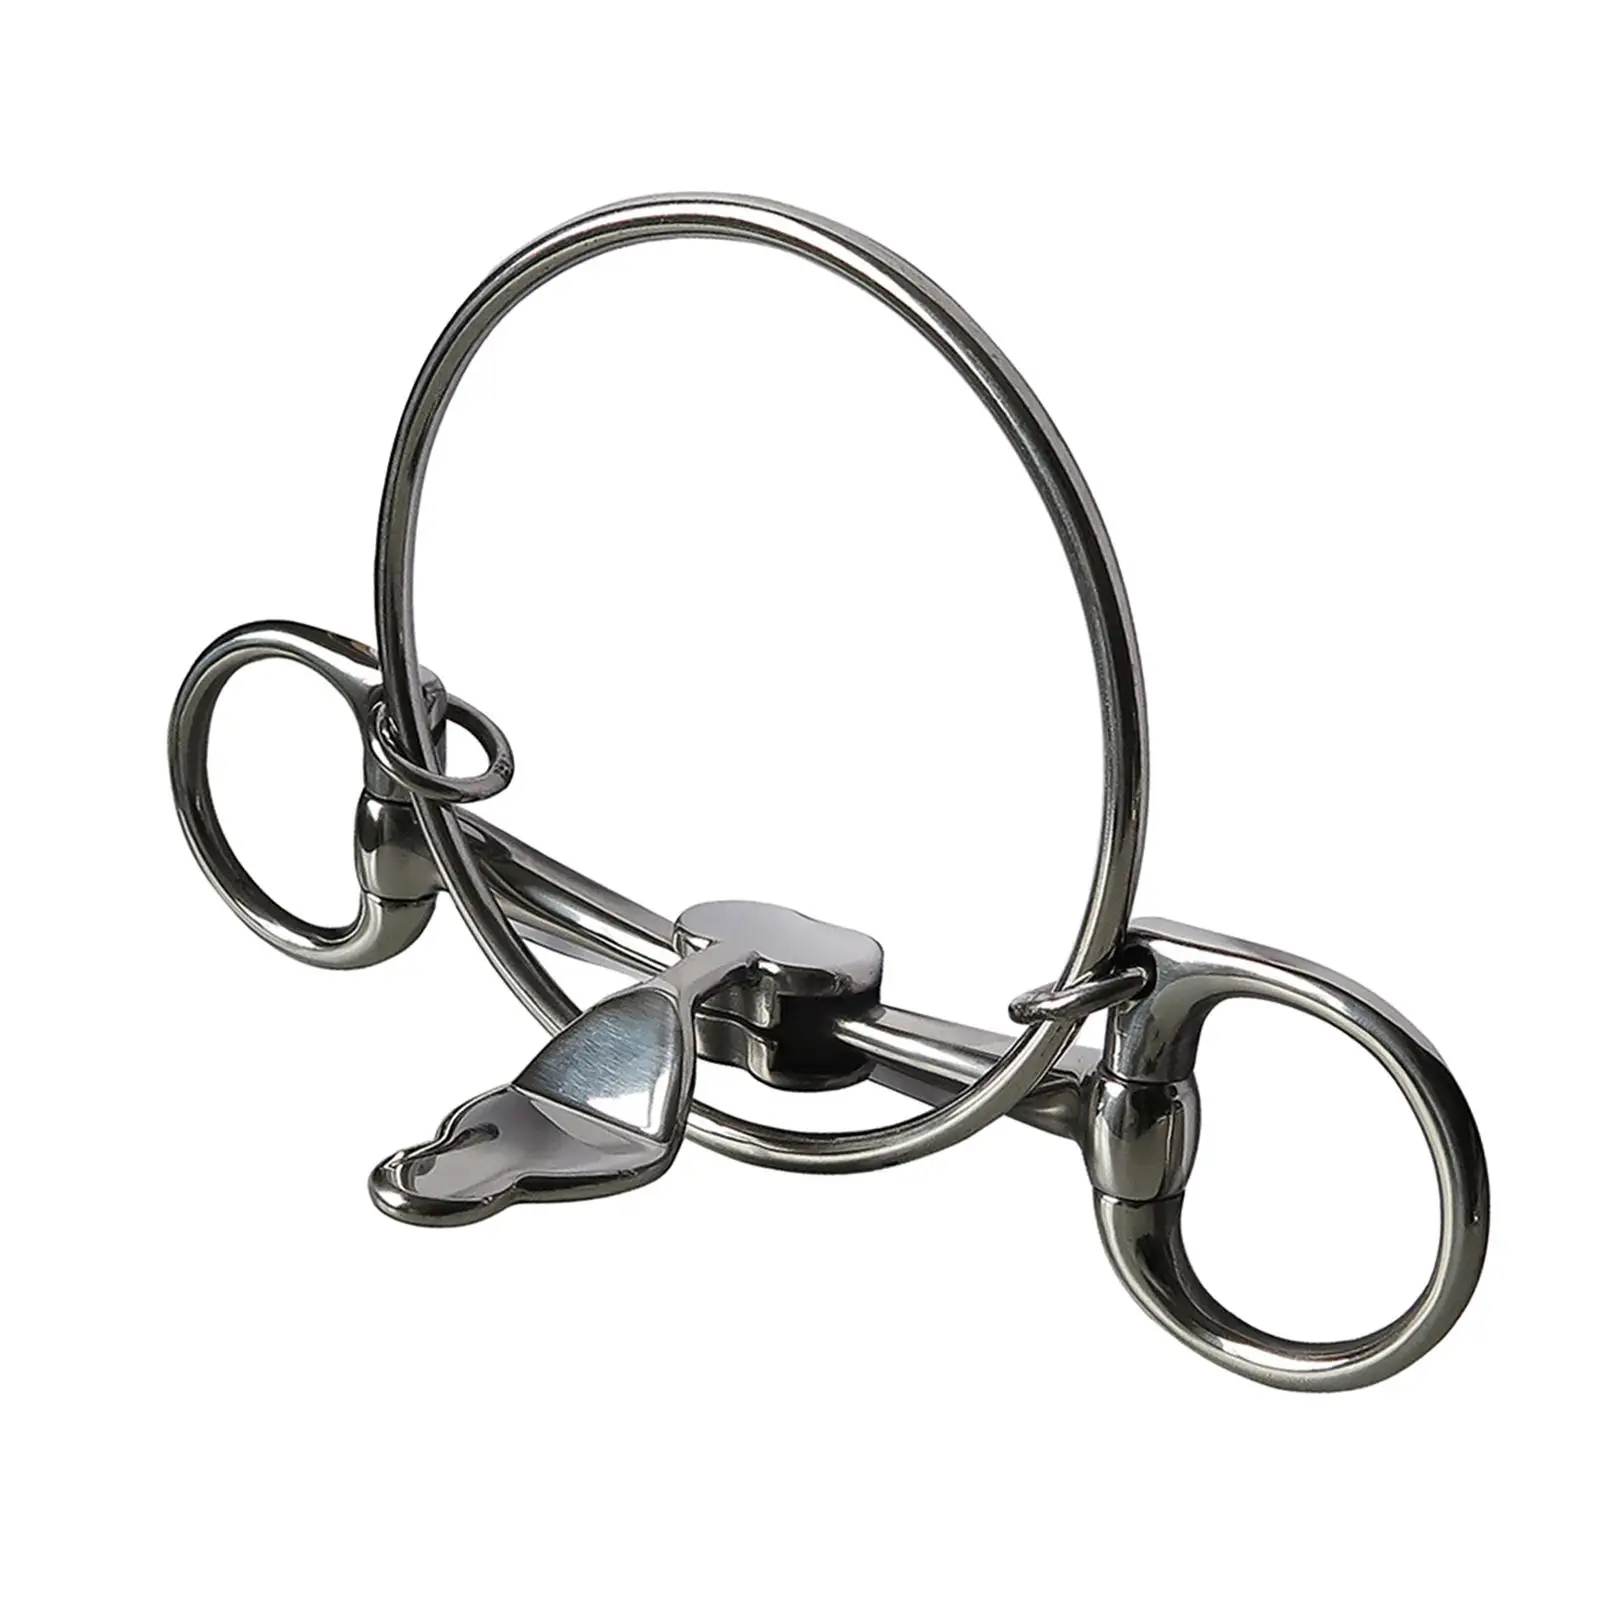 Horse Bit Equestrian Horse Bit Horse Bridle Metal Loose Rings Snaffle Harness Mouth All Purpose Horse Chewing Horse Rings Bit